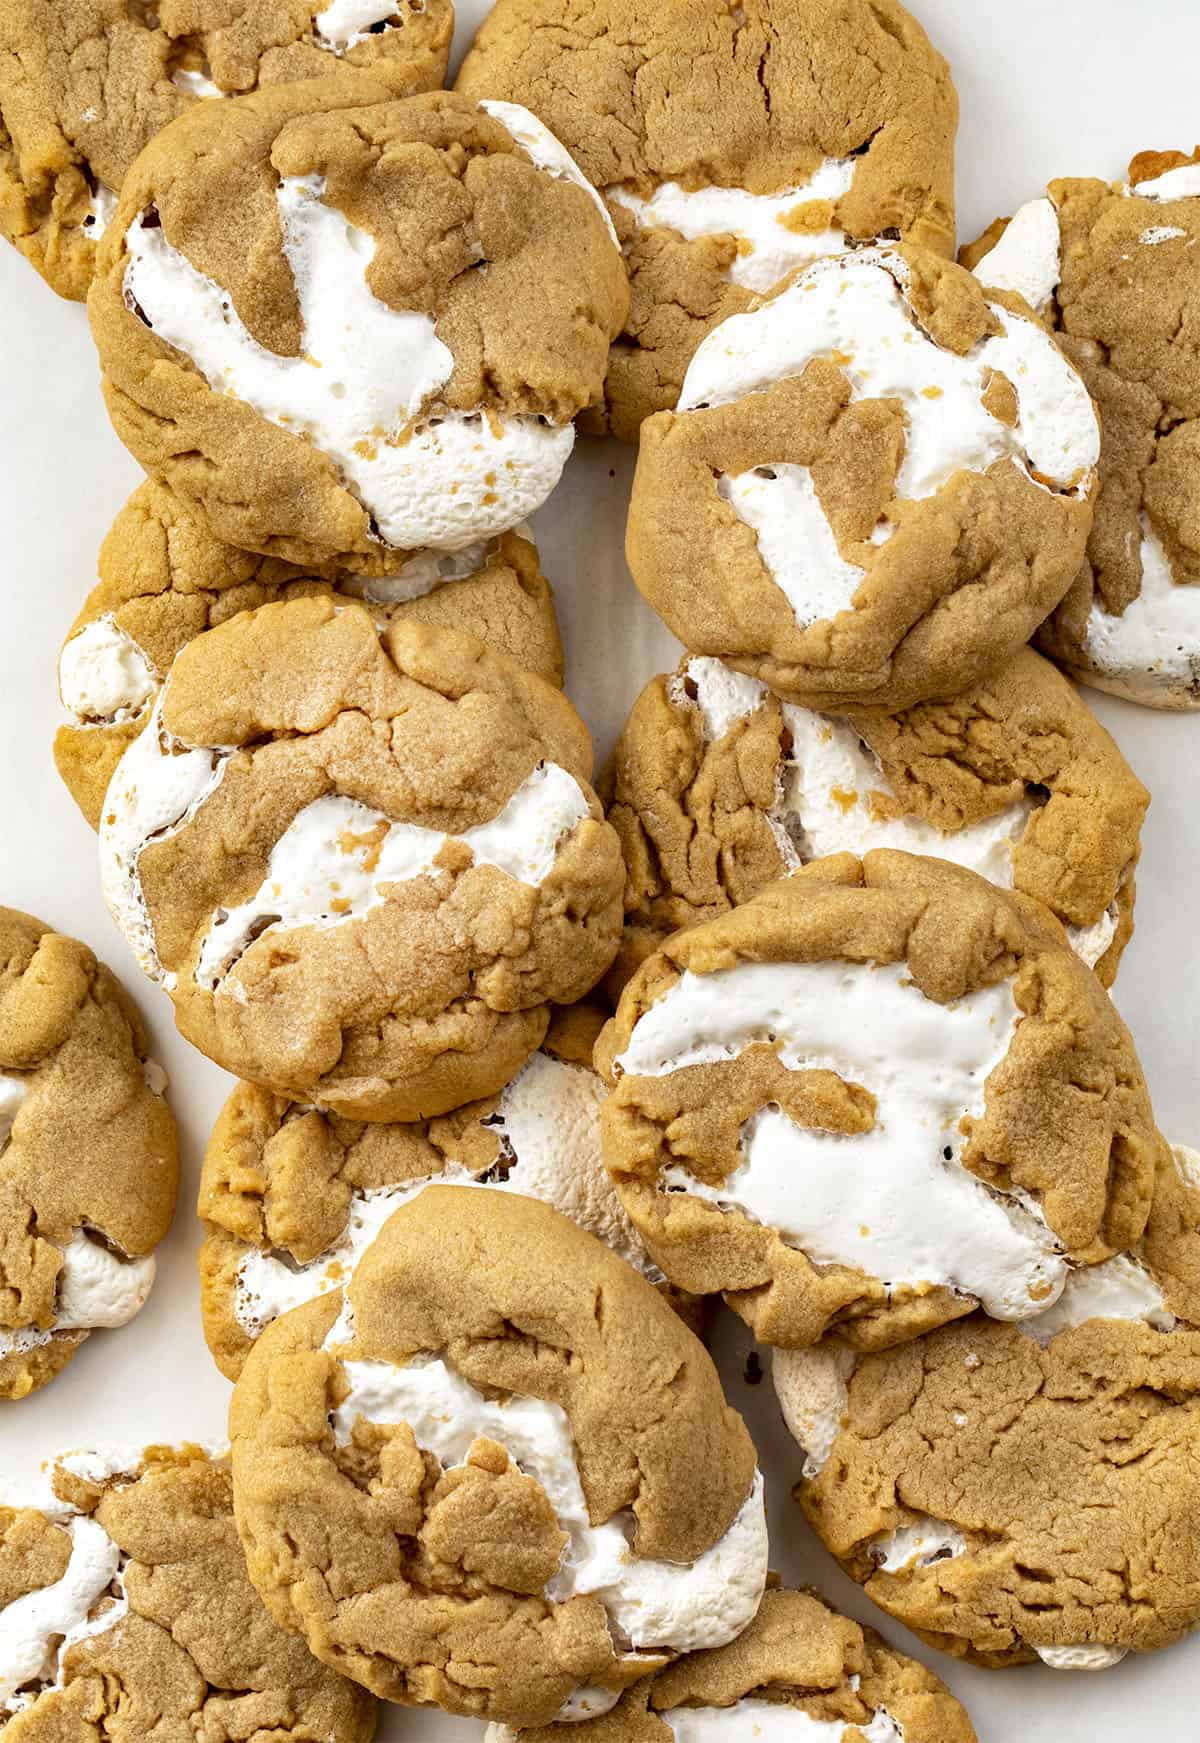 Fluffernutter Cookies on a White Counter From Overhead. Baking, Cookies, Cookie Recipes, Peanut Butter Cookies, Peanut Butter Marshmallow Cookies, Marshmallow Fluff, Cookie Exchange, Dessert, Easy Cookies, i am baker, iambaker